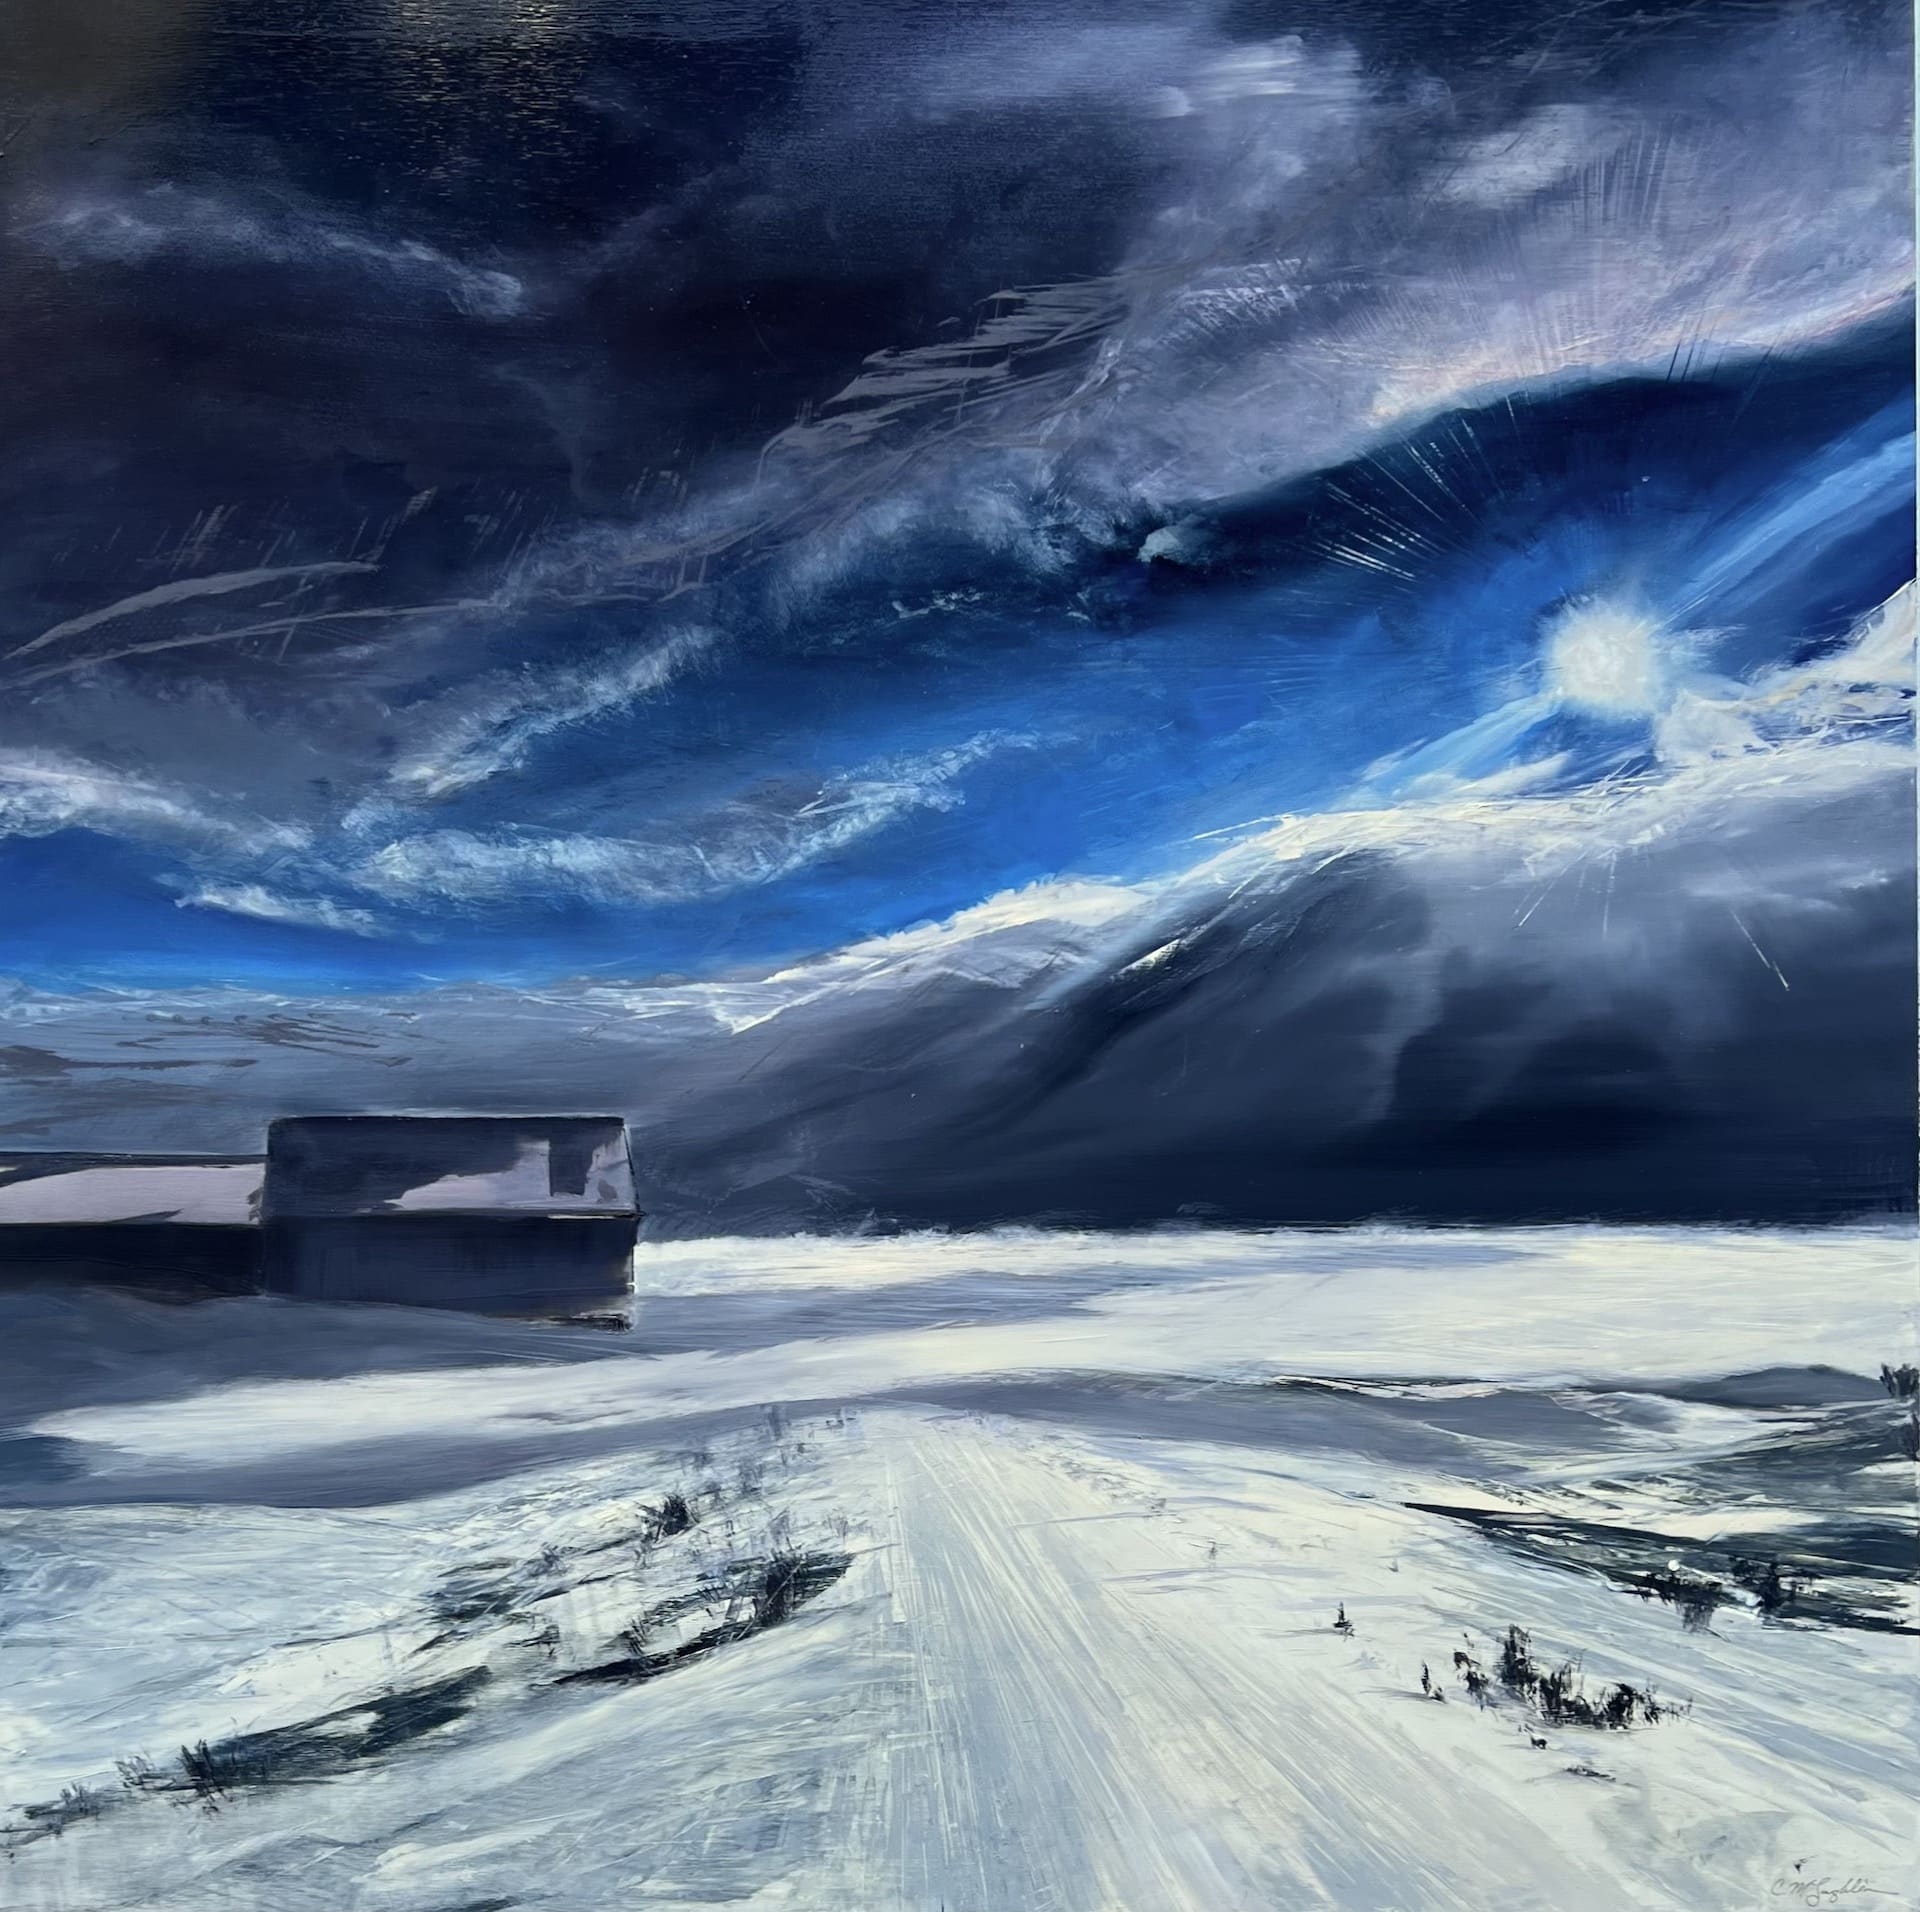 A contemporary oil painting on metal panel depicting the sun breaking through dark storm clouds, illuminating the snowy fields by artist Cynthia McLoughlin.